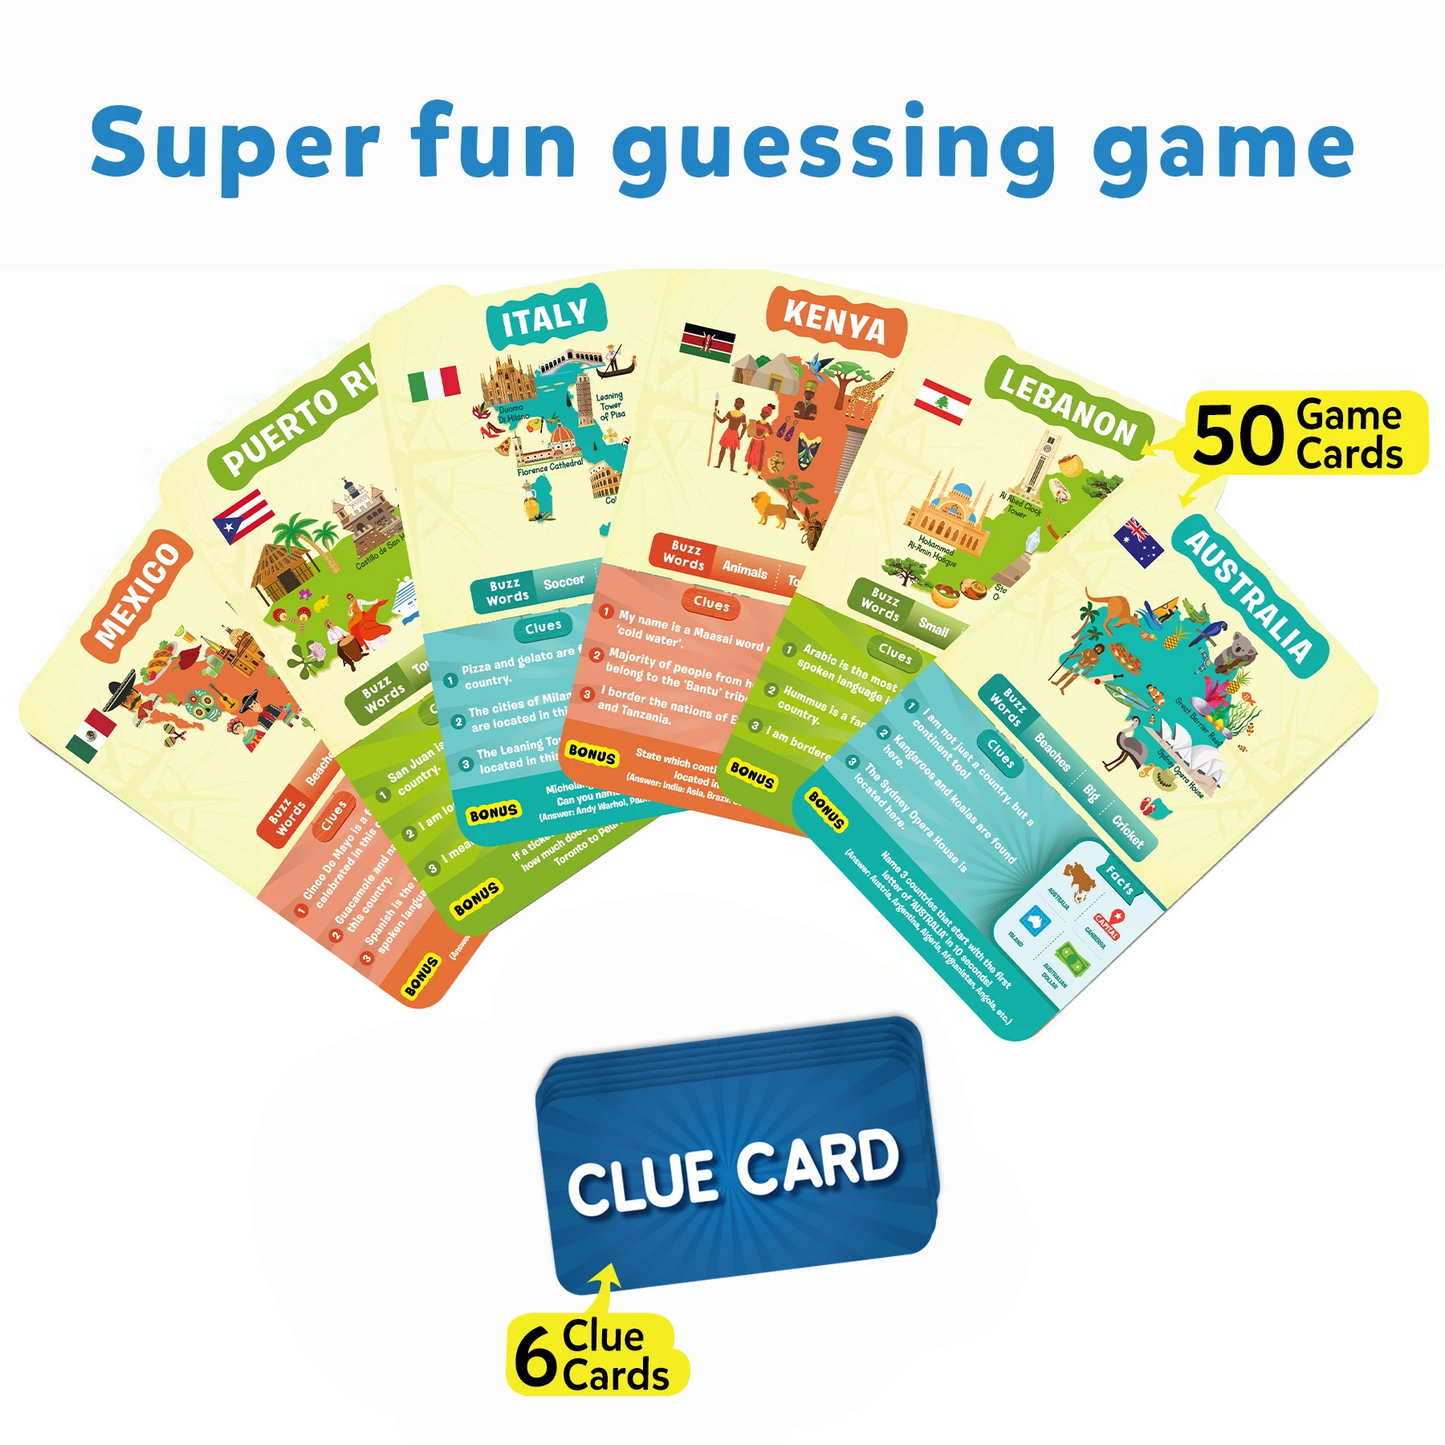 Skillmatics Guess in 10 Countries Around the World, Gifts for Ages 8 and Up